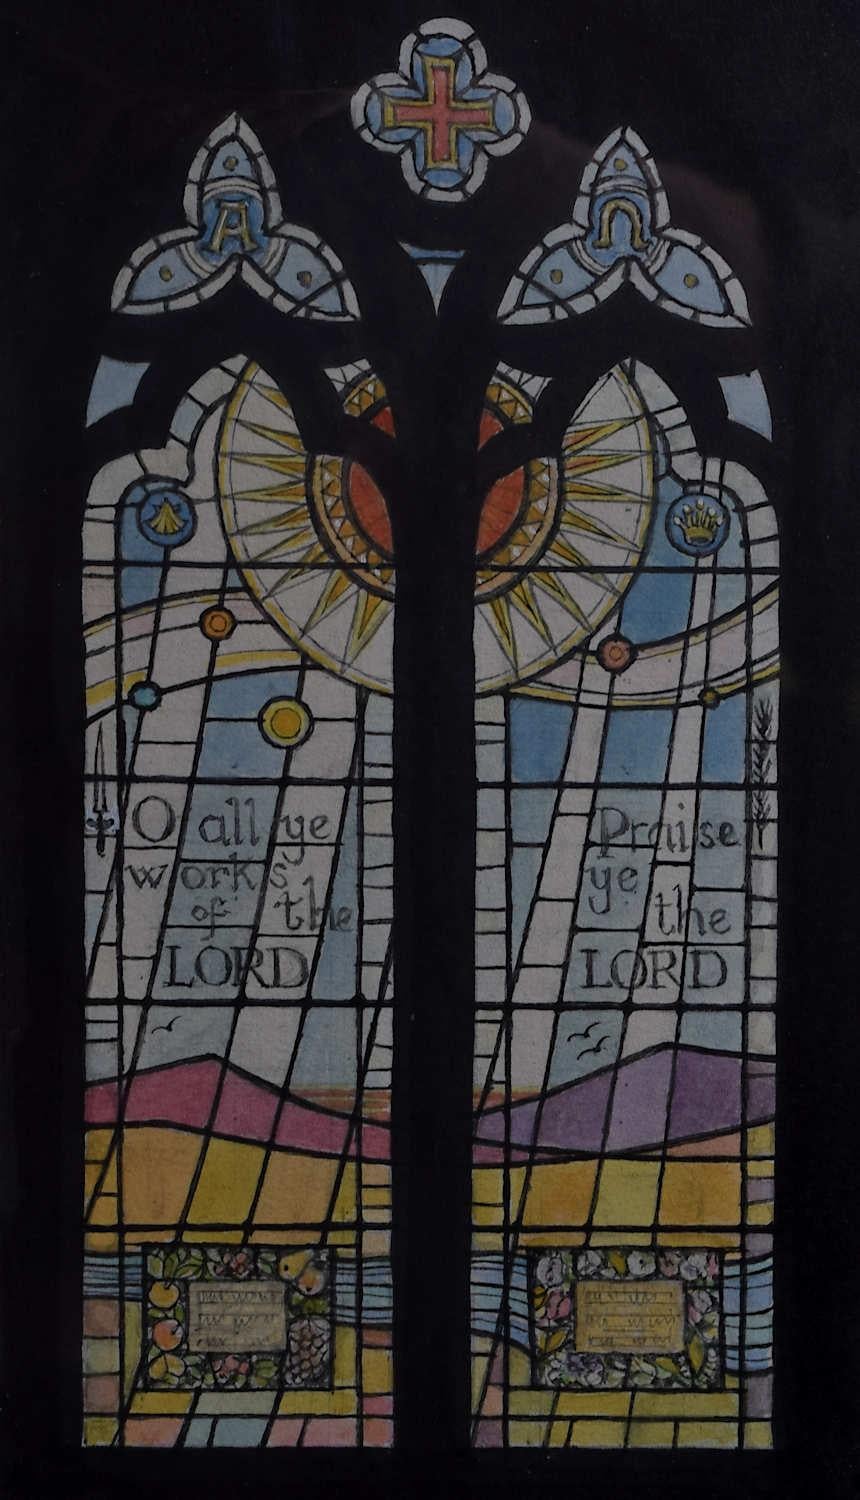 We acquired a series of watercolour stained glass designs from Jane Gray's studio. To find more scroll down to "More from this Seller" and below it click on "See all from this seller." 

Jane Gray (b.1931)
Stained Glass Design
Watercolour
19 x 11